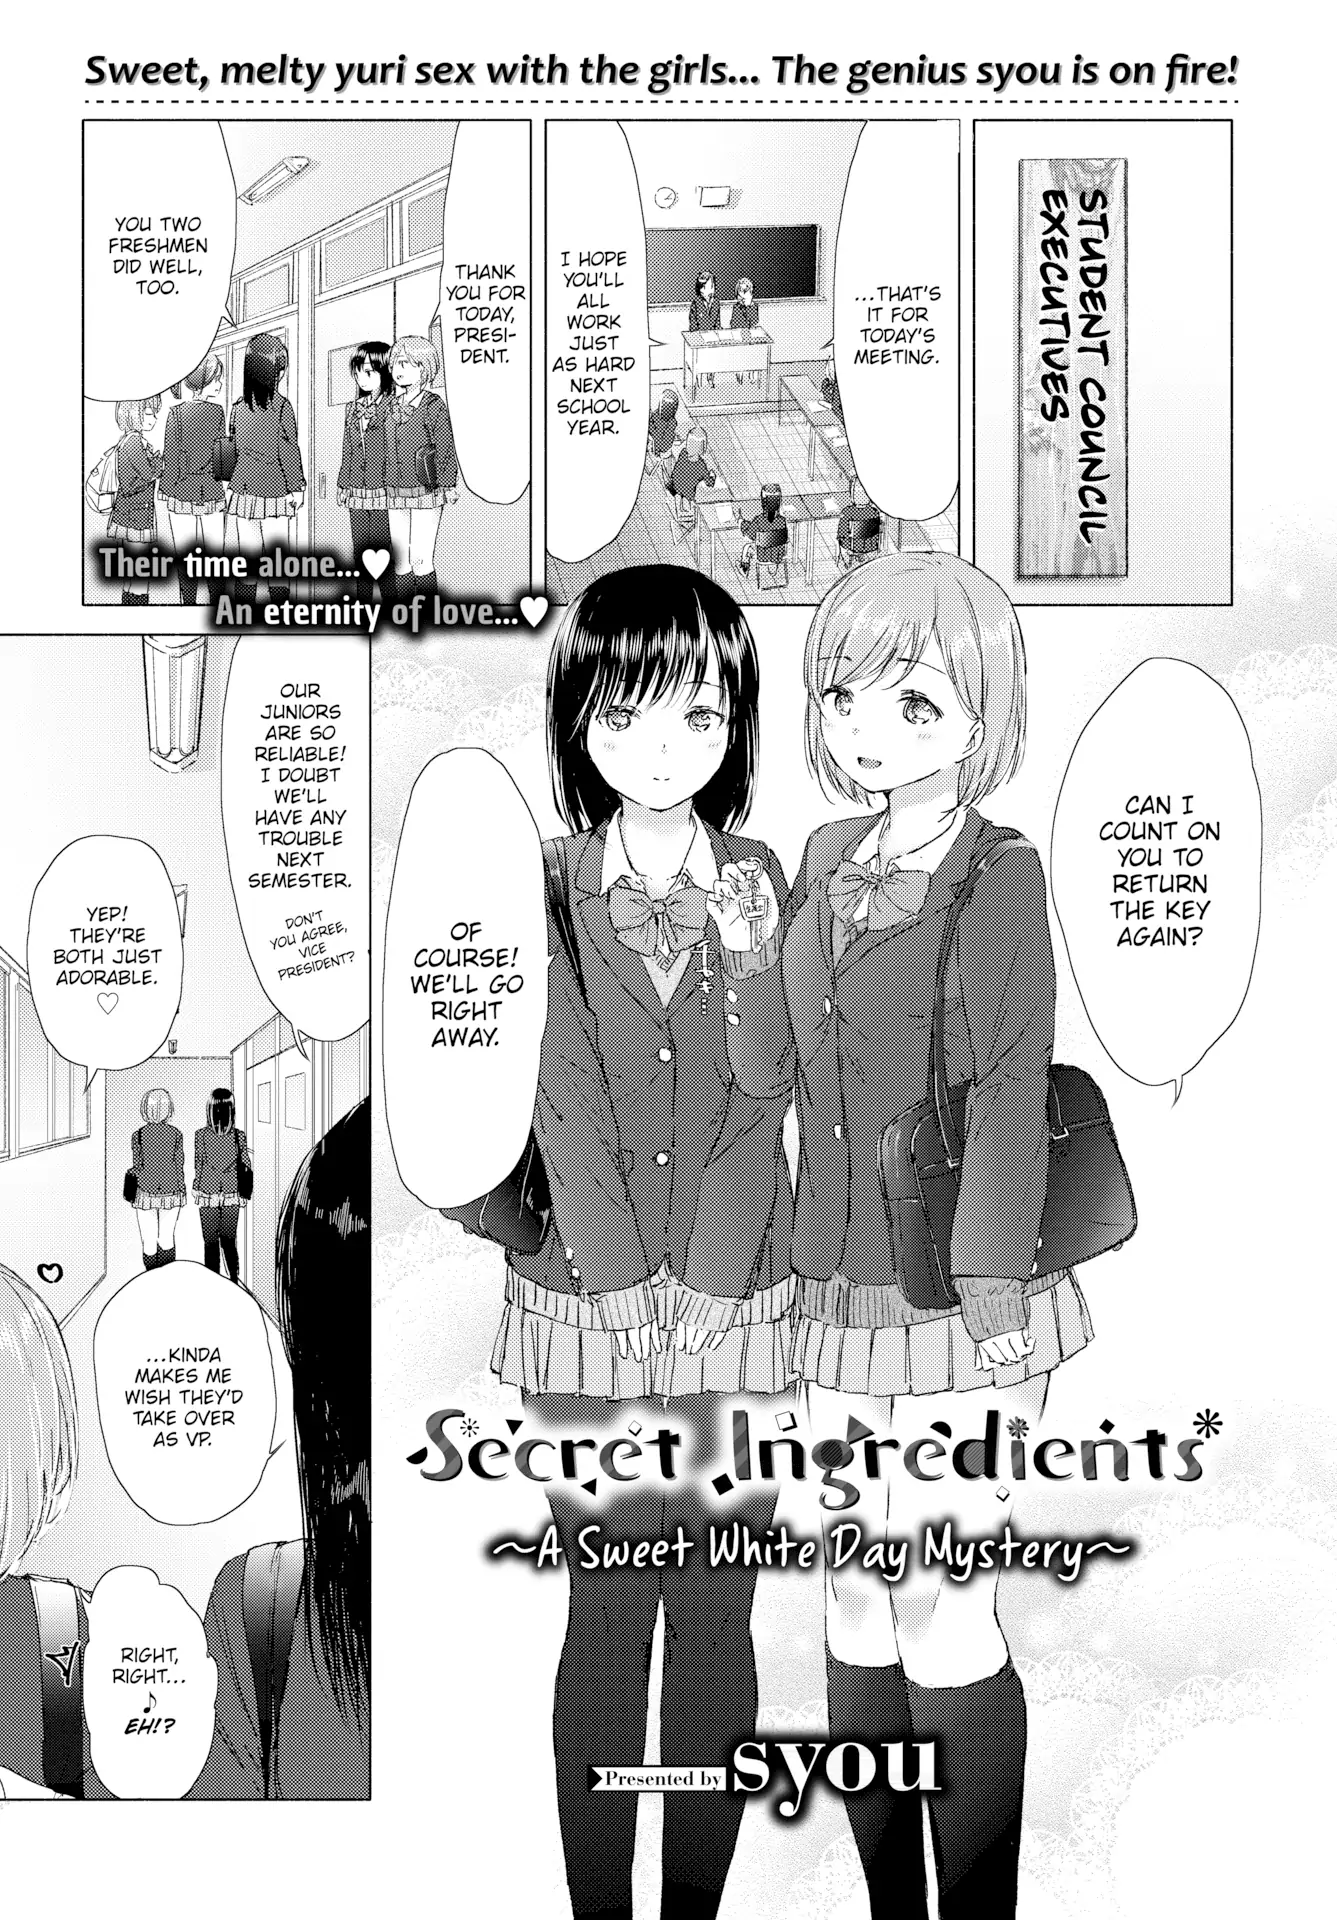 Secret Ingredients - A sweet White Day Mystery Chapter 1 - page 1